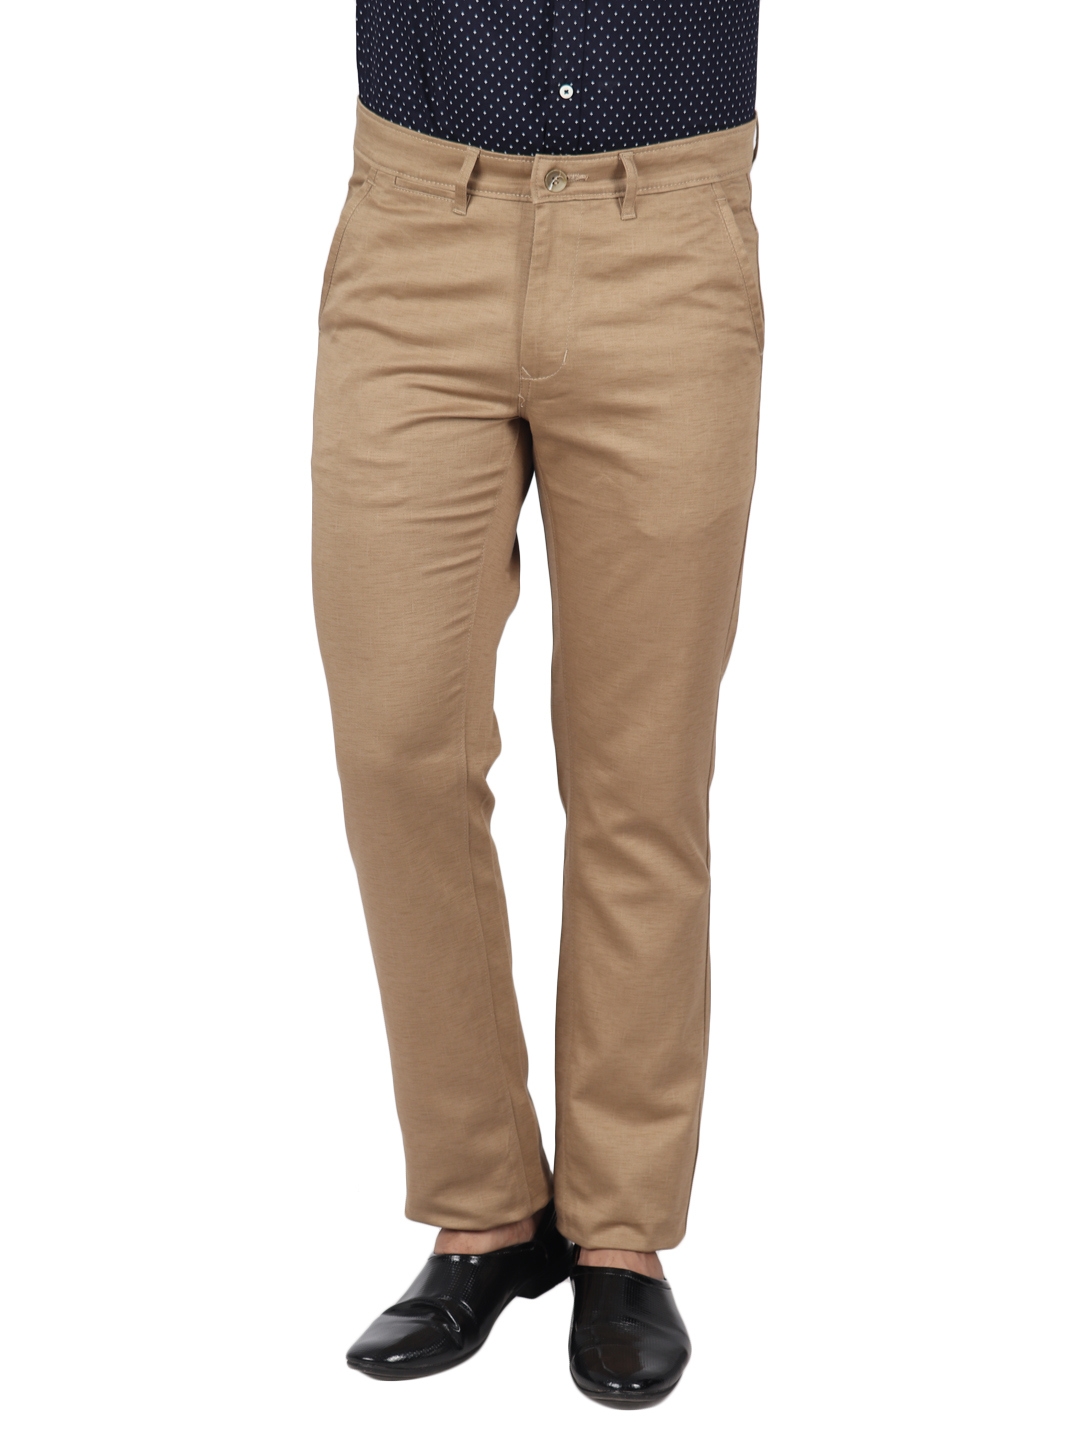 D'cot by Donear | D'cot by Donear Men's Brown Cotton Trousers 0